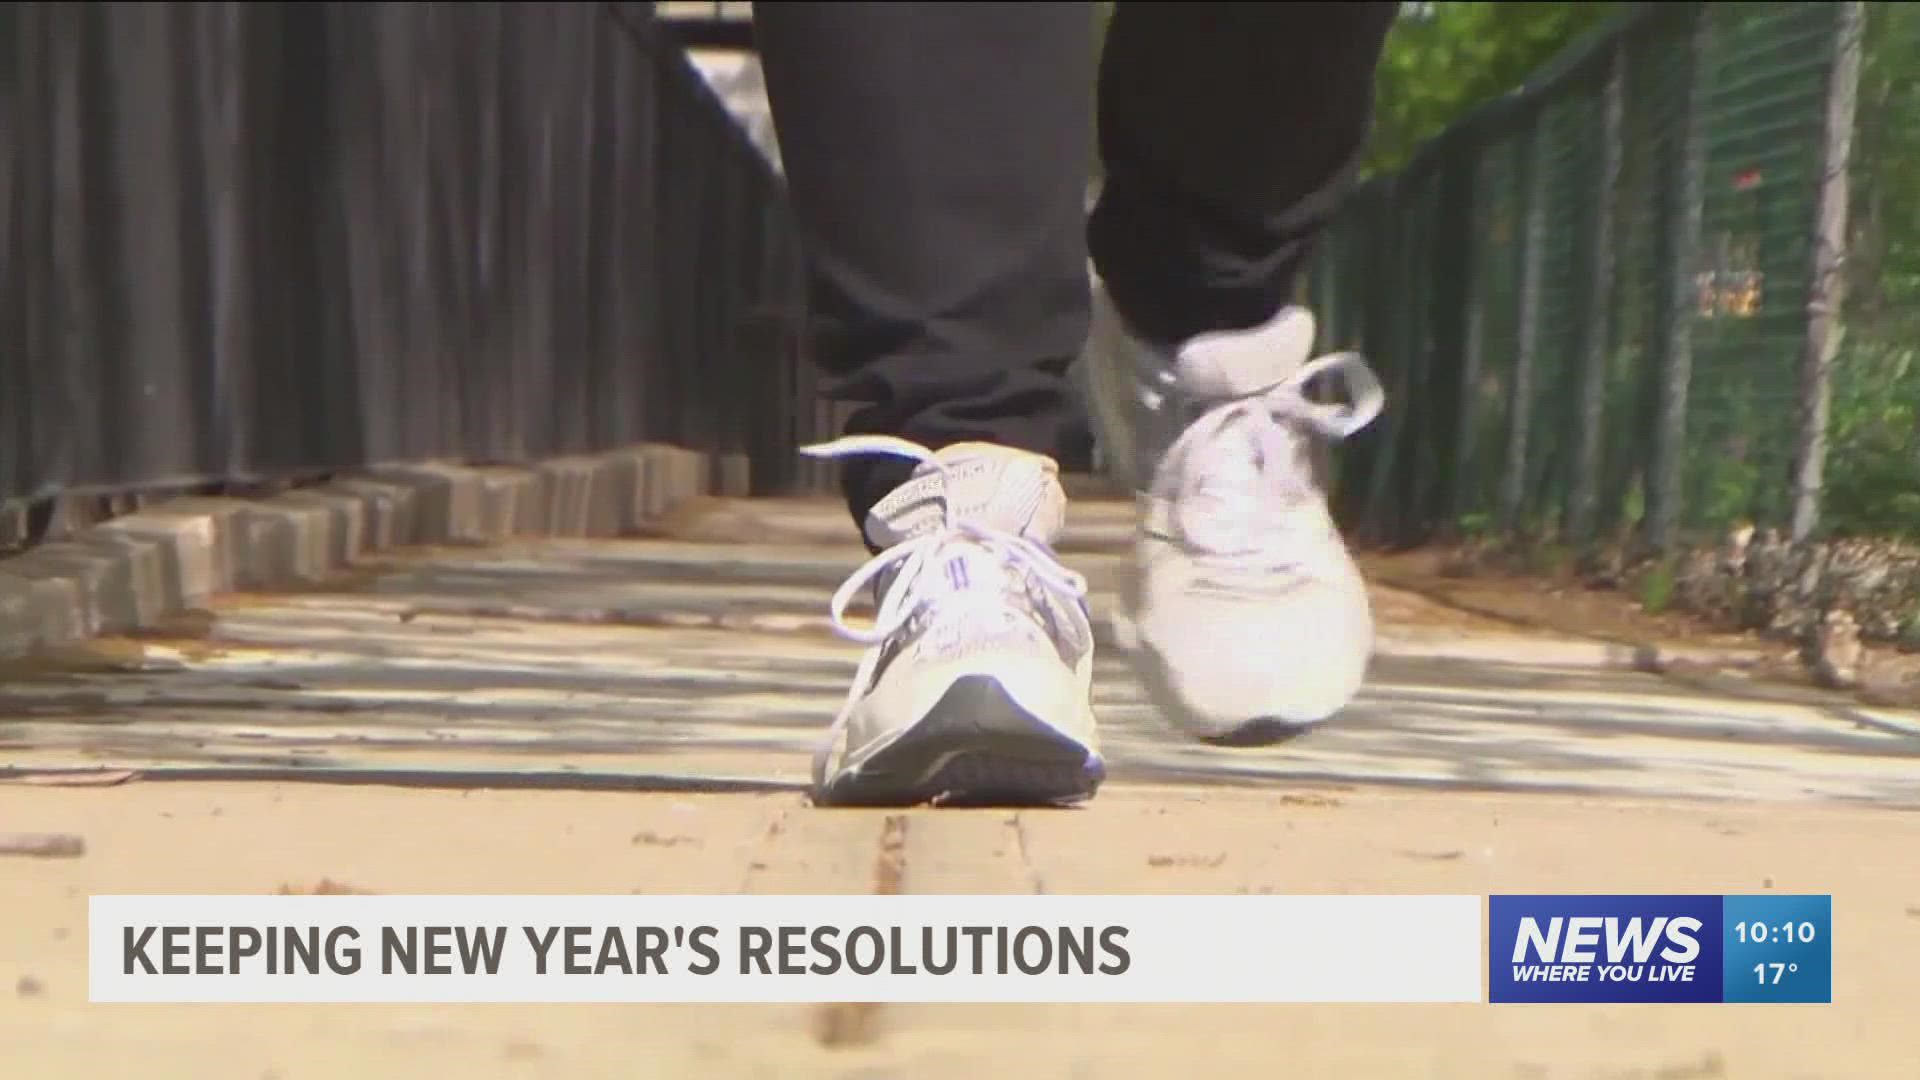 Many people make New Year resolutions but some experts are giving tips on how to stay motivated to stick to those goals.